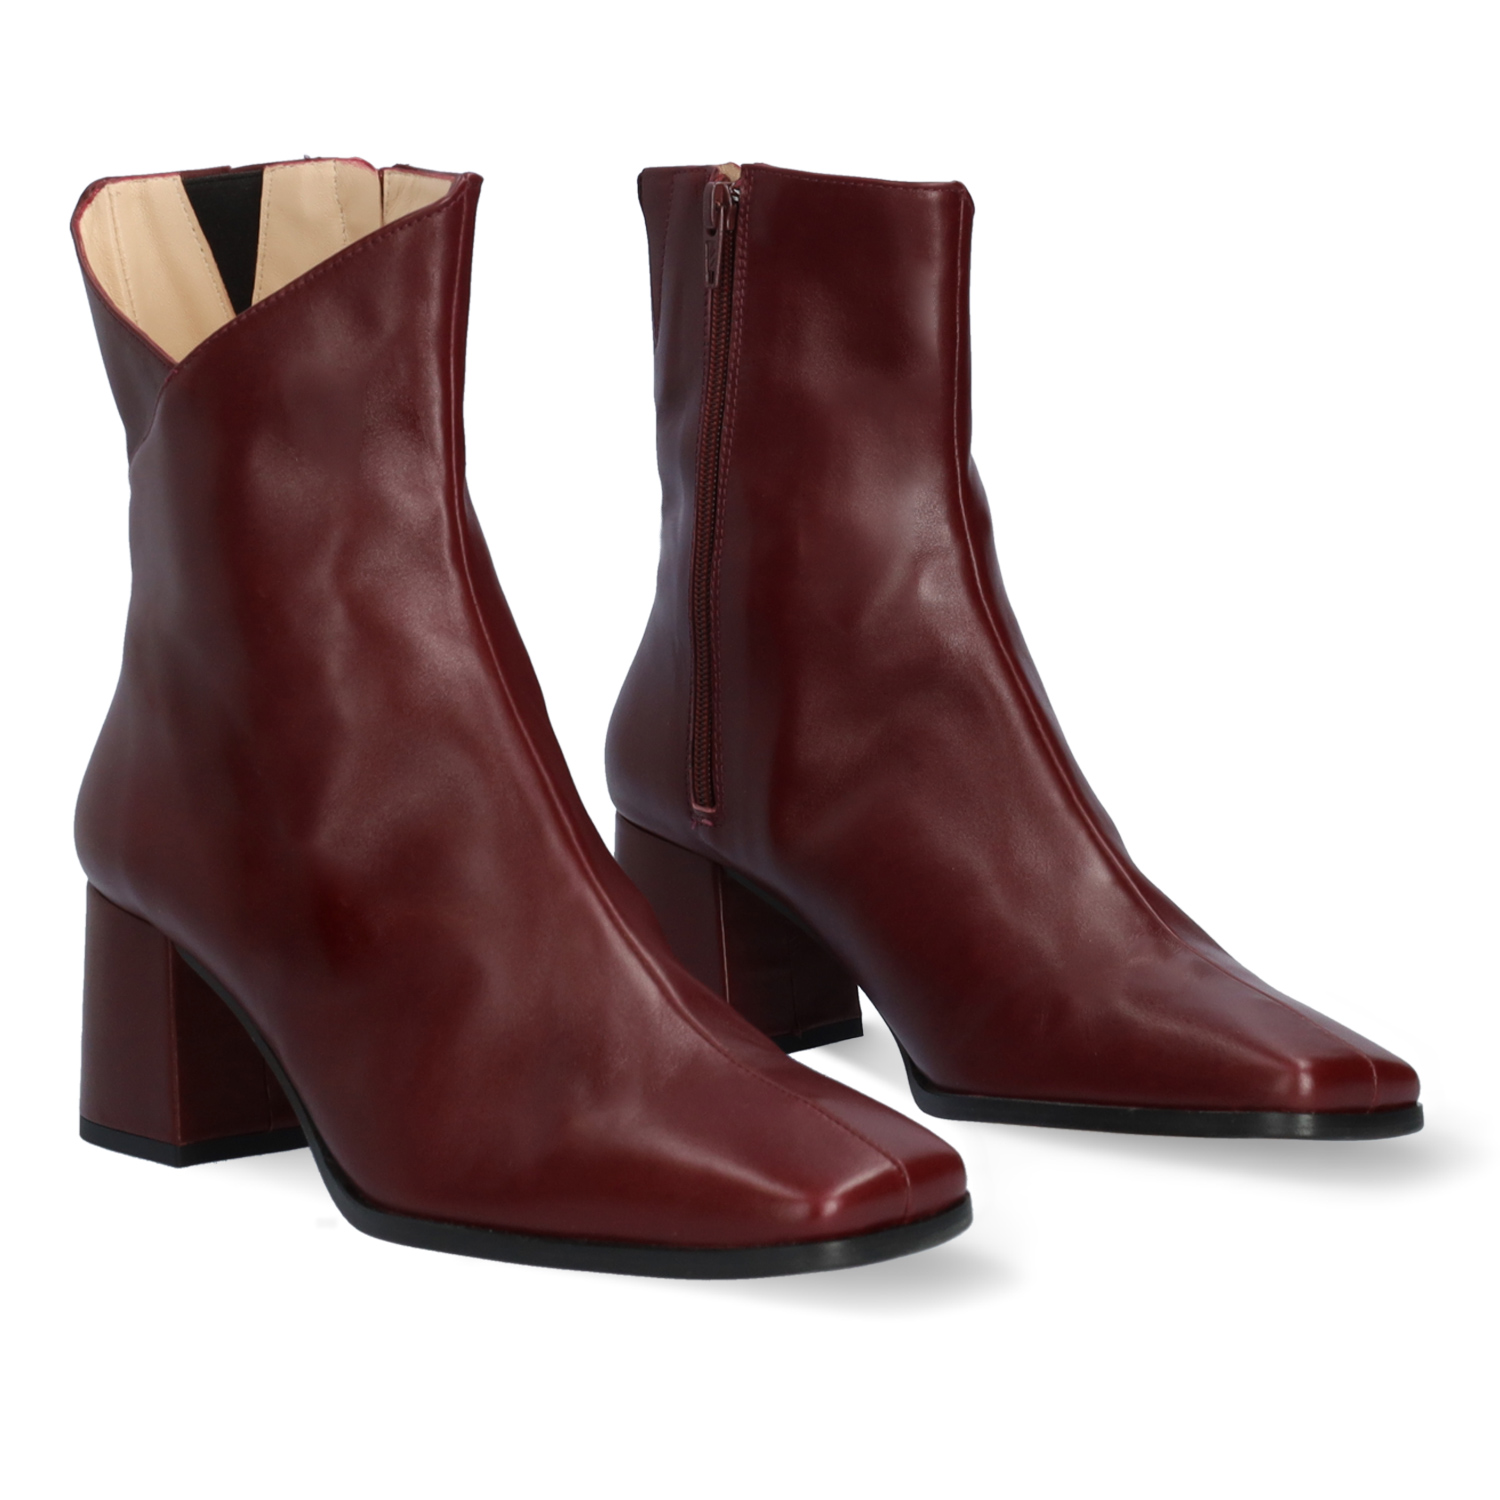 Heeled booties in burgundy leather 